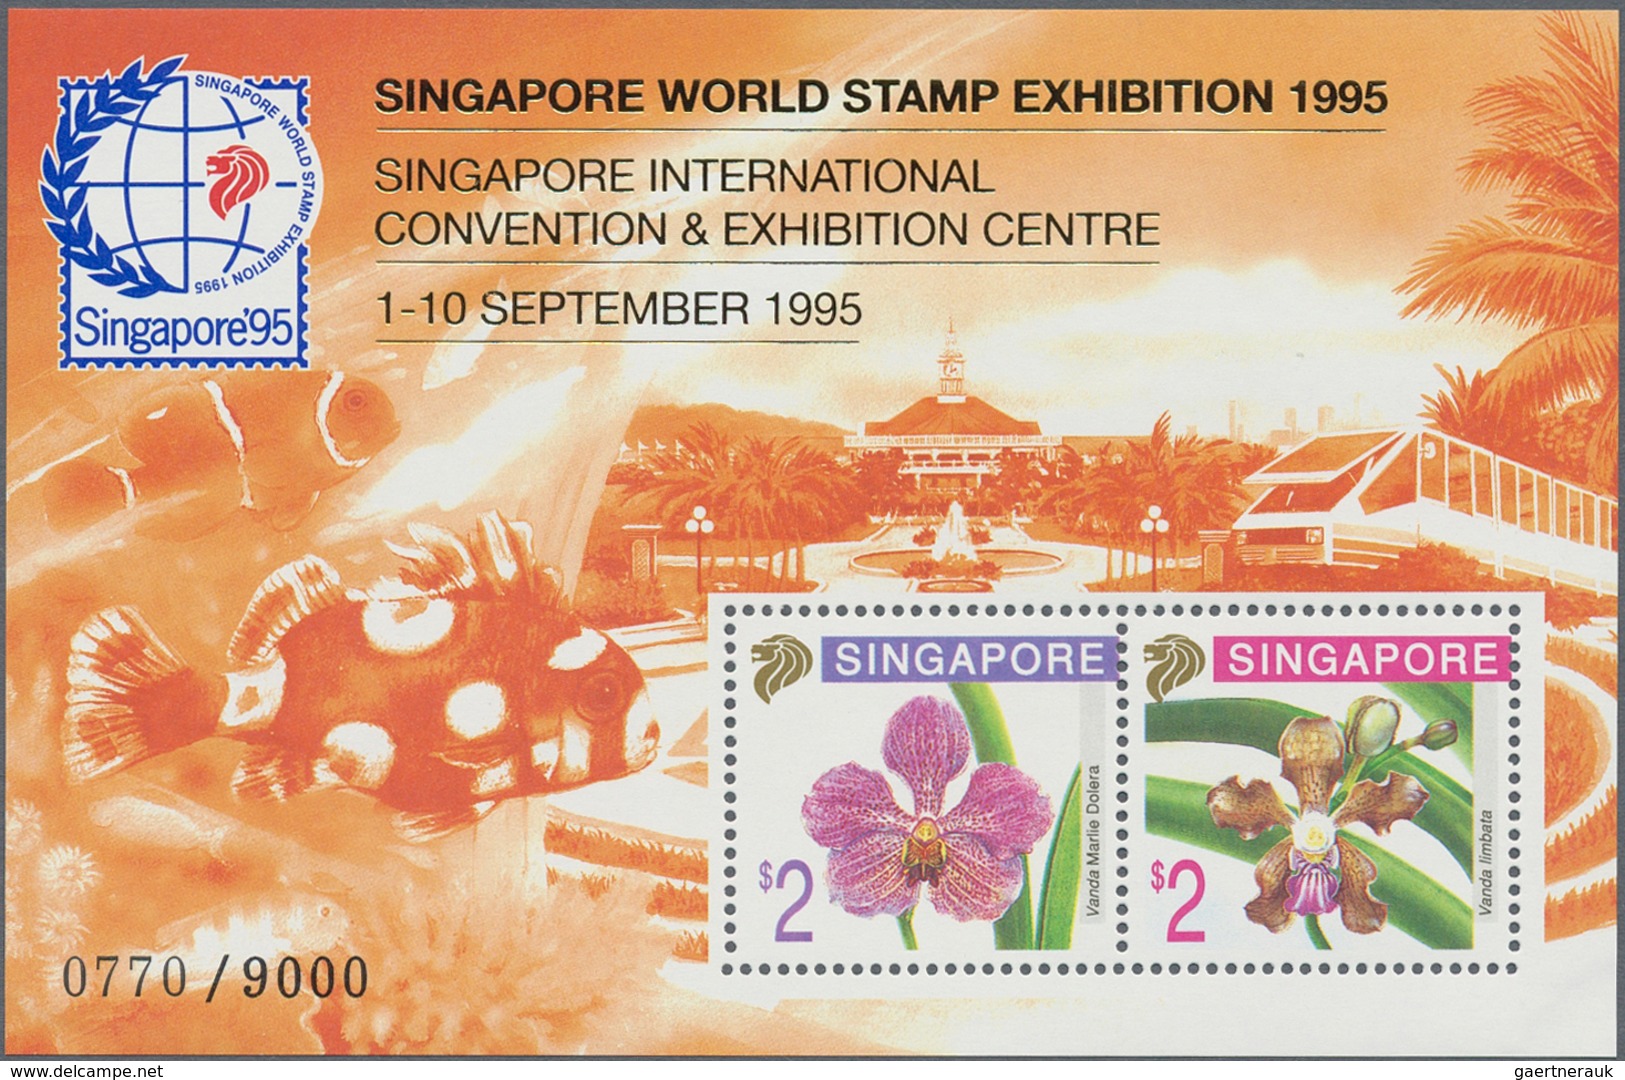 Singapur: 1995 Four 'Orchids' Miniature Sheets, Even Two Of The Orange One And The Larger Size 'Proo - Singapur (...-1959)